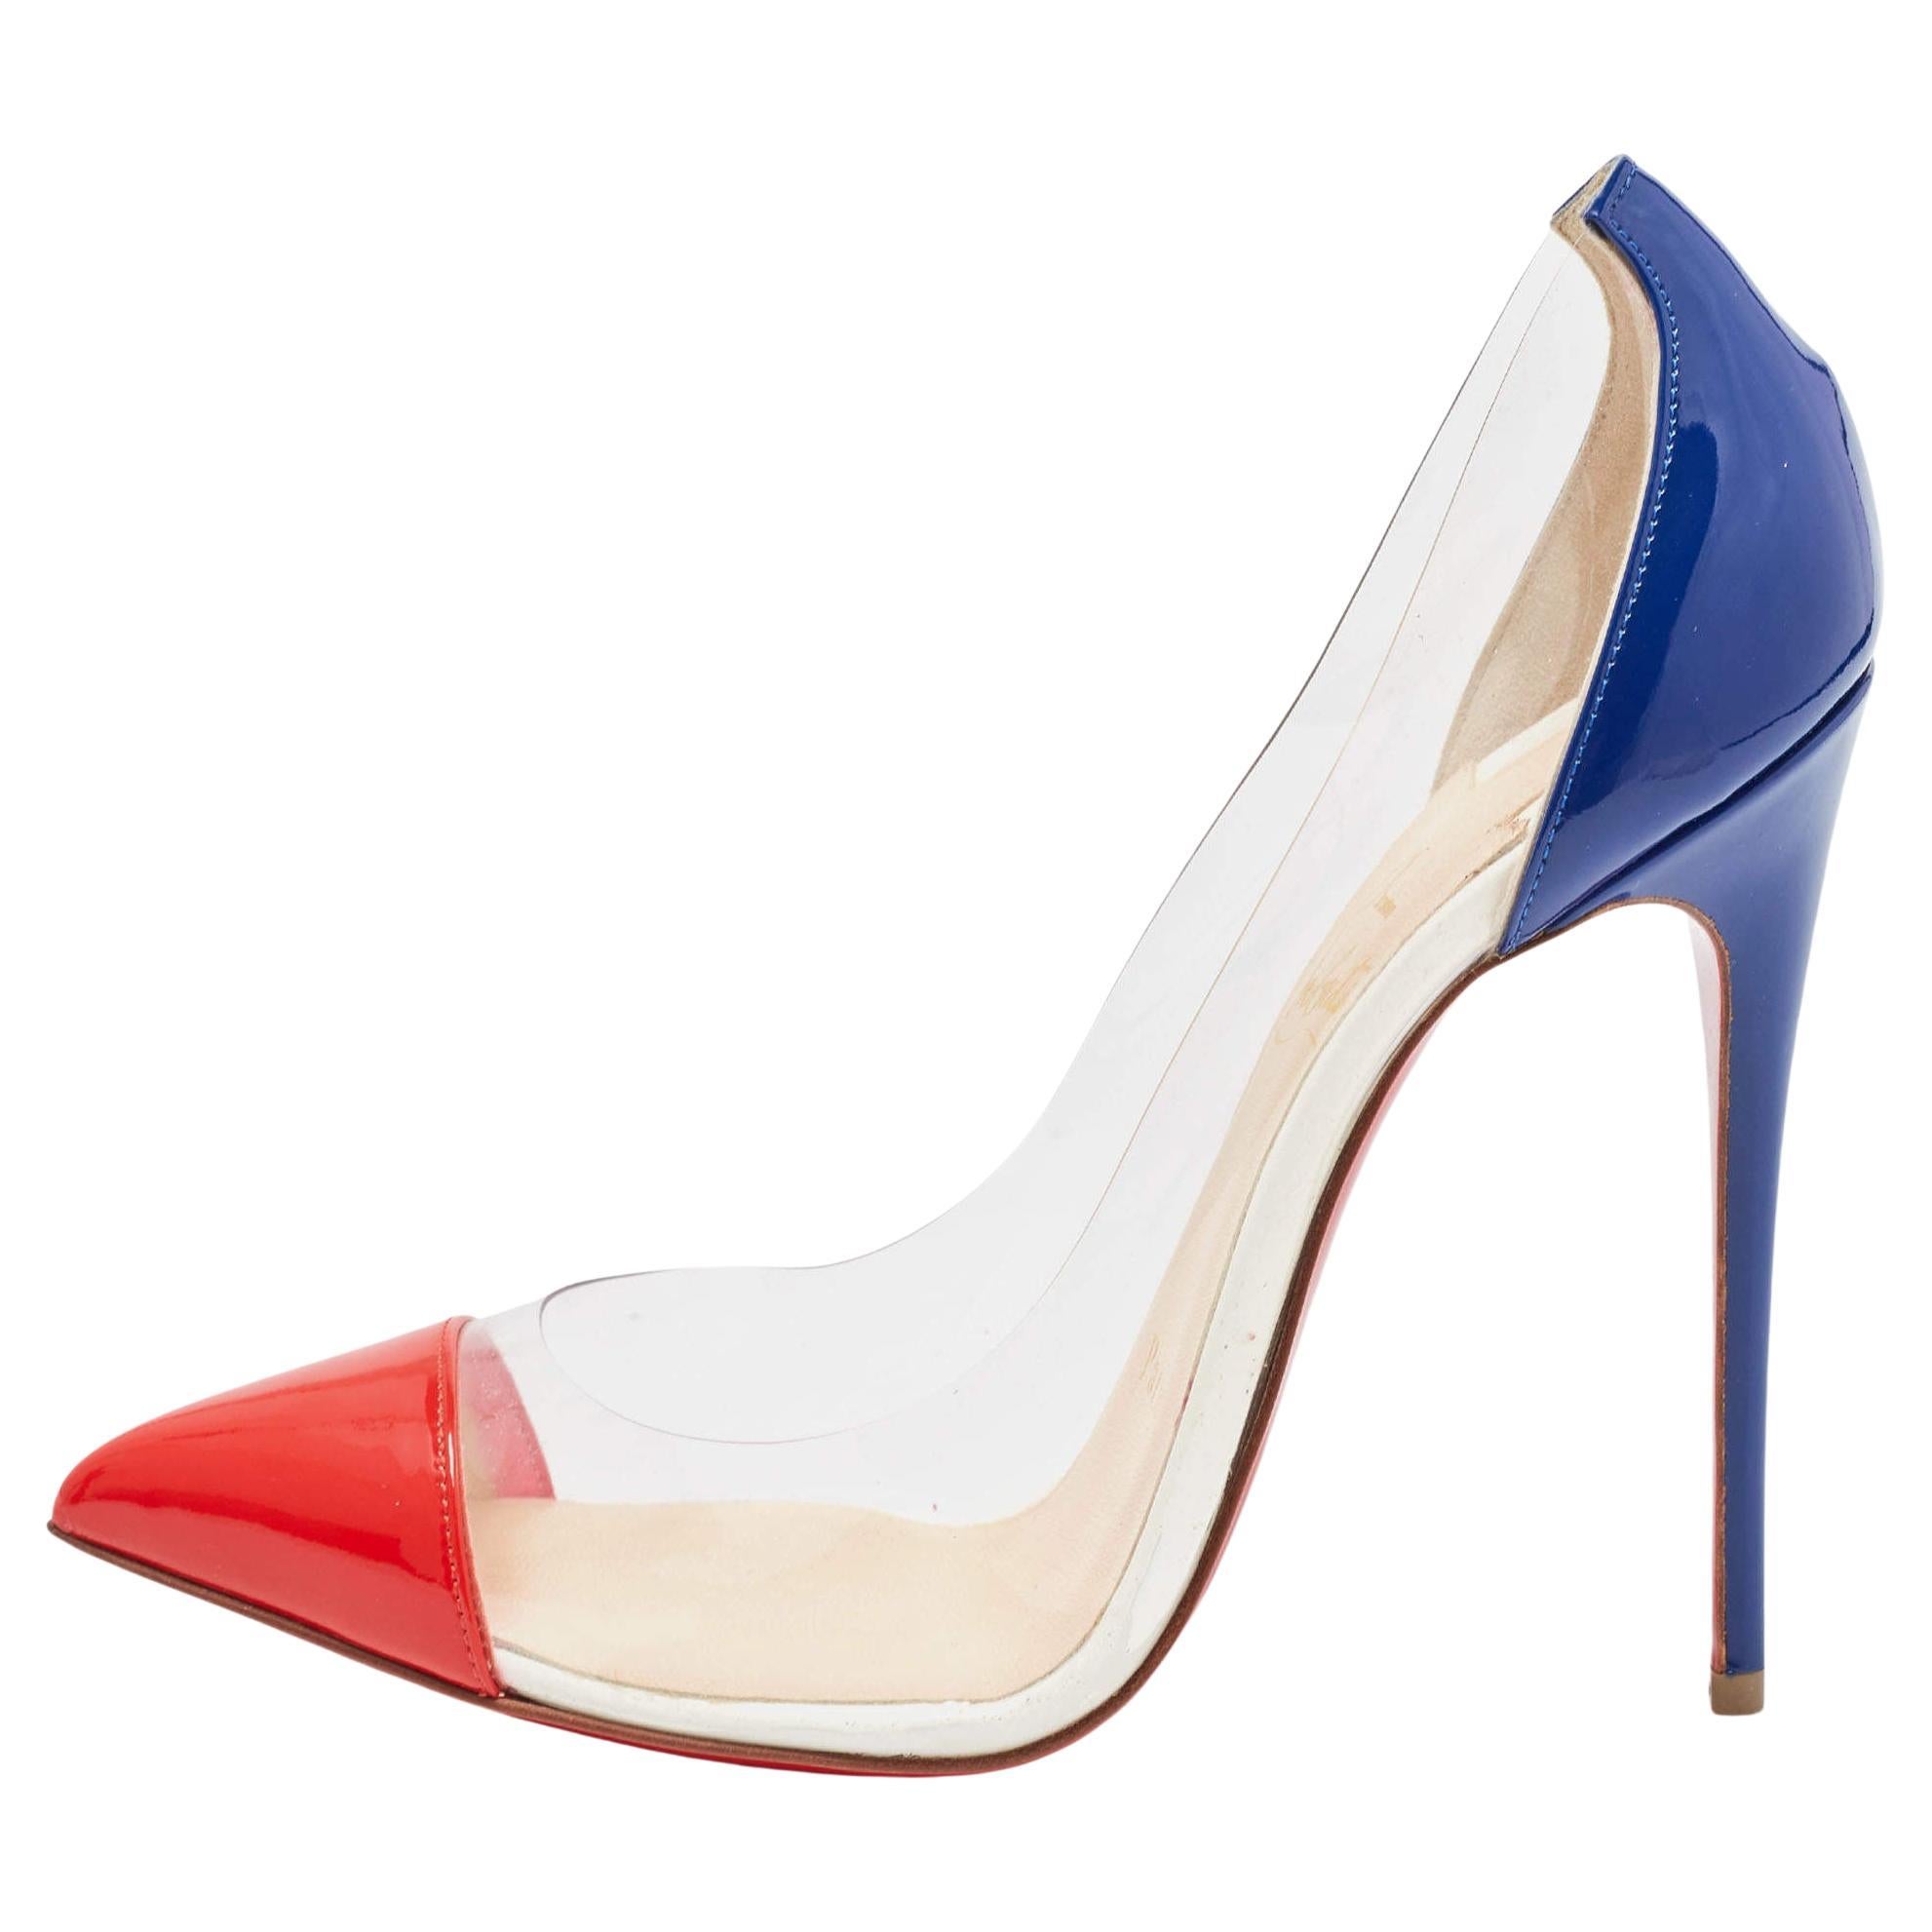 Christian Louboutin Red/Blue Patent Leather and PVC Debout Pumps Size 37